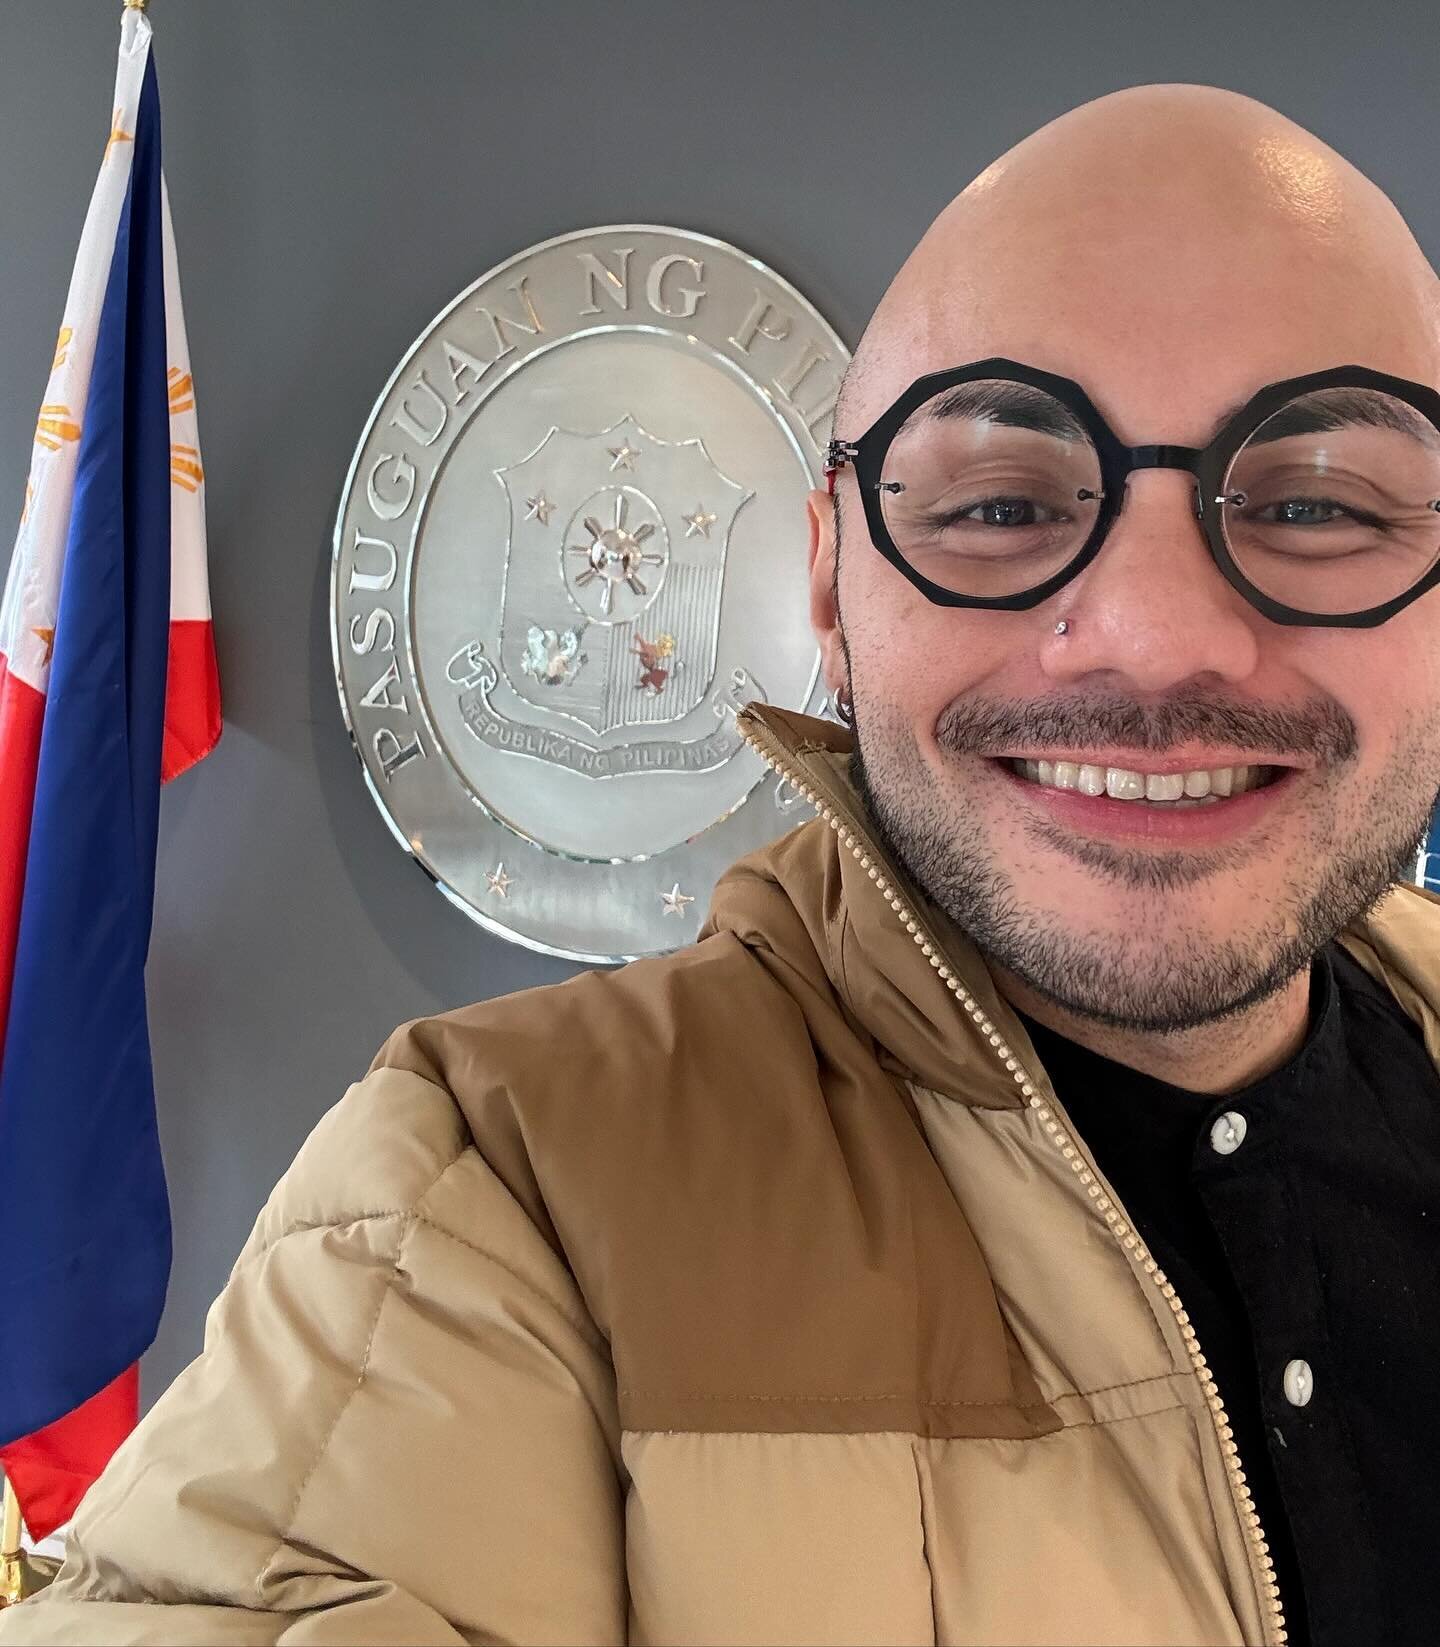 IT&rsquo;S OFFICIAL! I have obtained my Philippine citizenship &amp; am now a dual citizen! My voter registration is confirmed &amp; I&rsquo;ll be able to vote in the next Senate election in the Philippines in May 2025! 🇵🇭 #Philippines #Motherland 